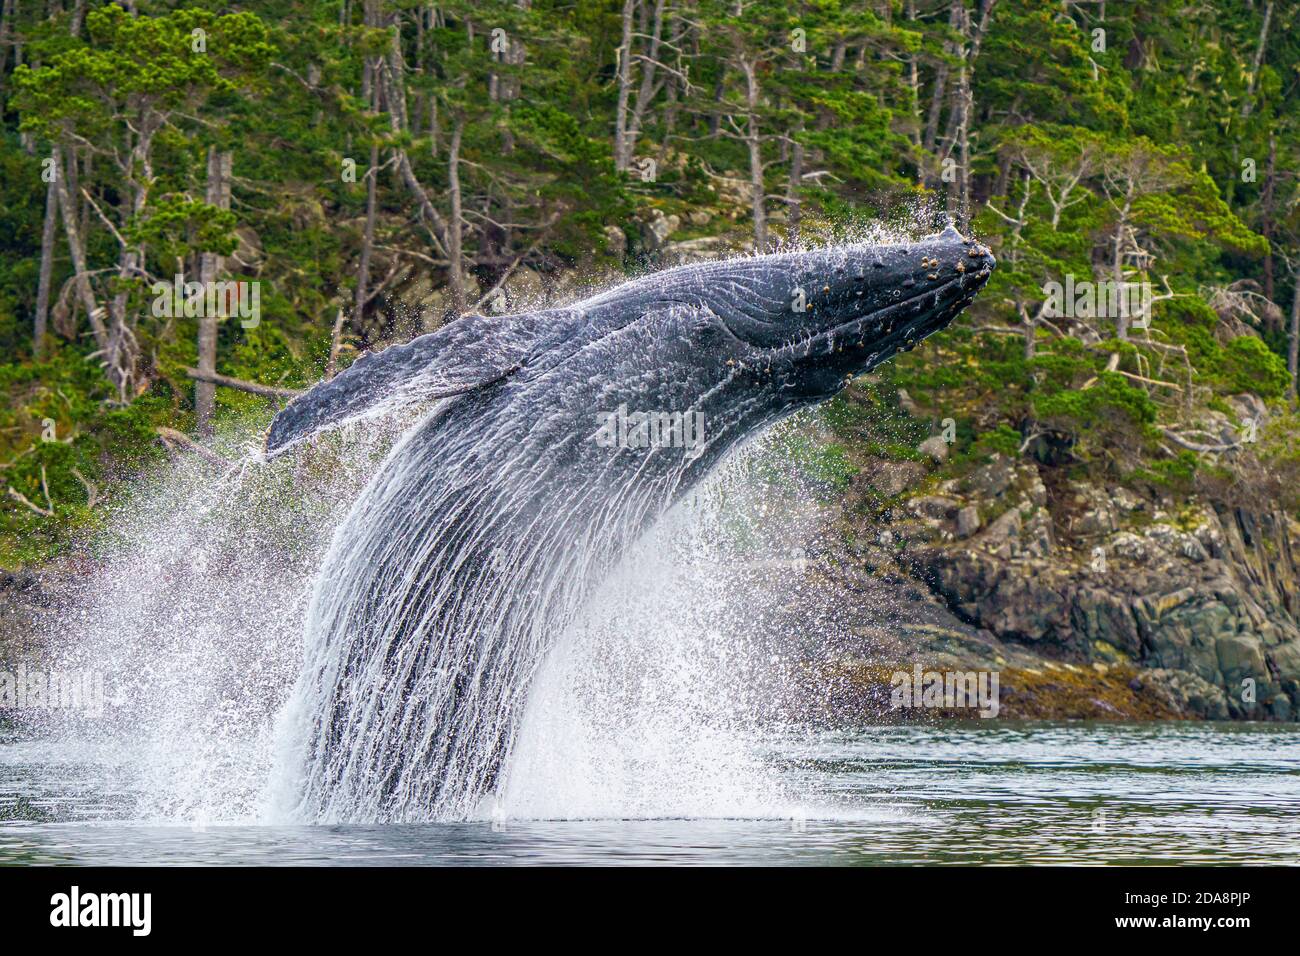 Humpback whale breaching in front of the beautiful scenery of the British Columbia Coastal Mountains near the Broughton Archipelago, First Nations Ter Stock Photo